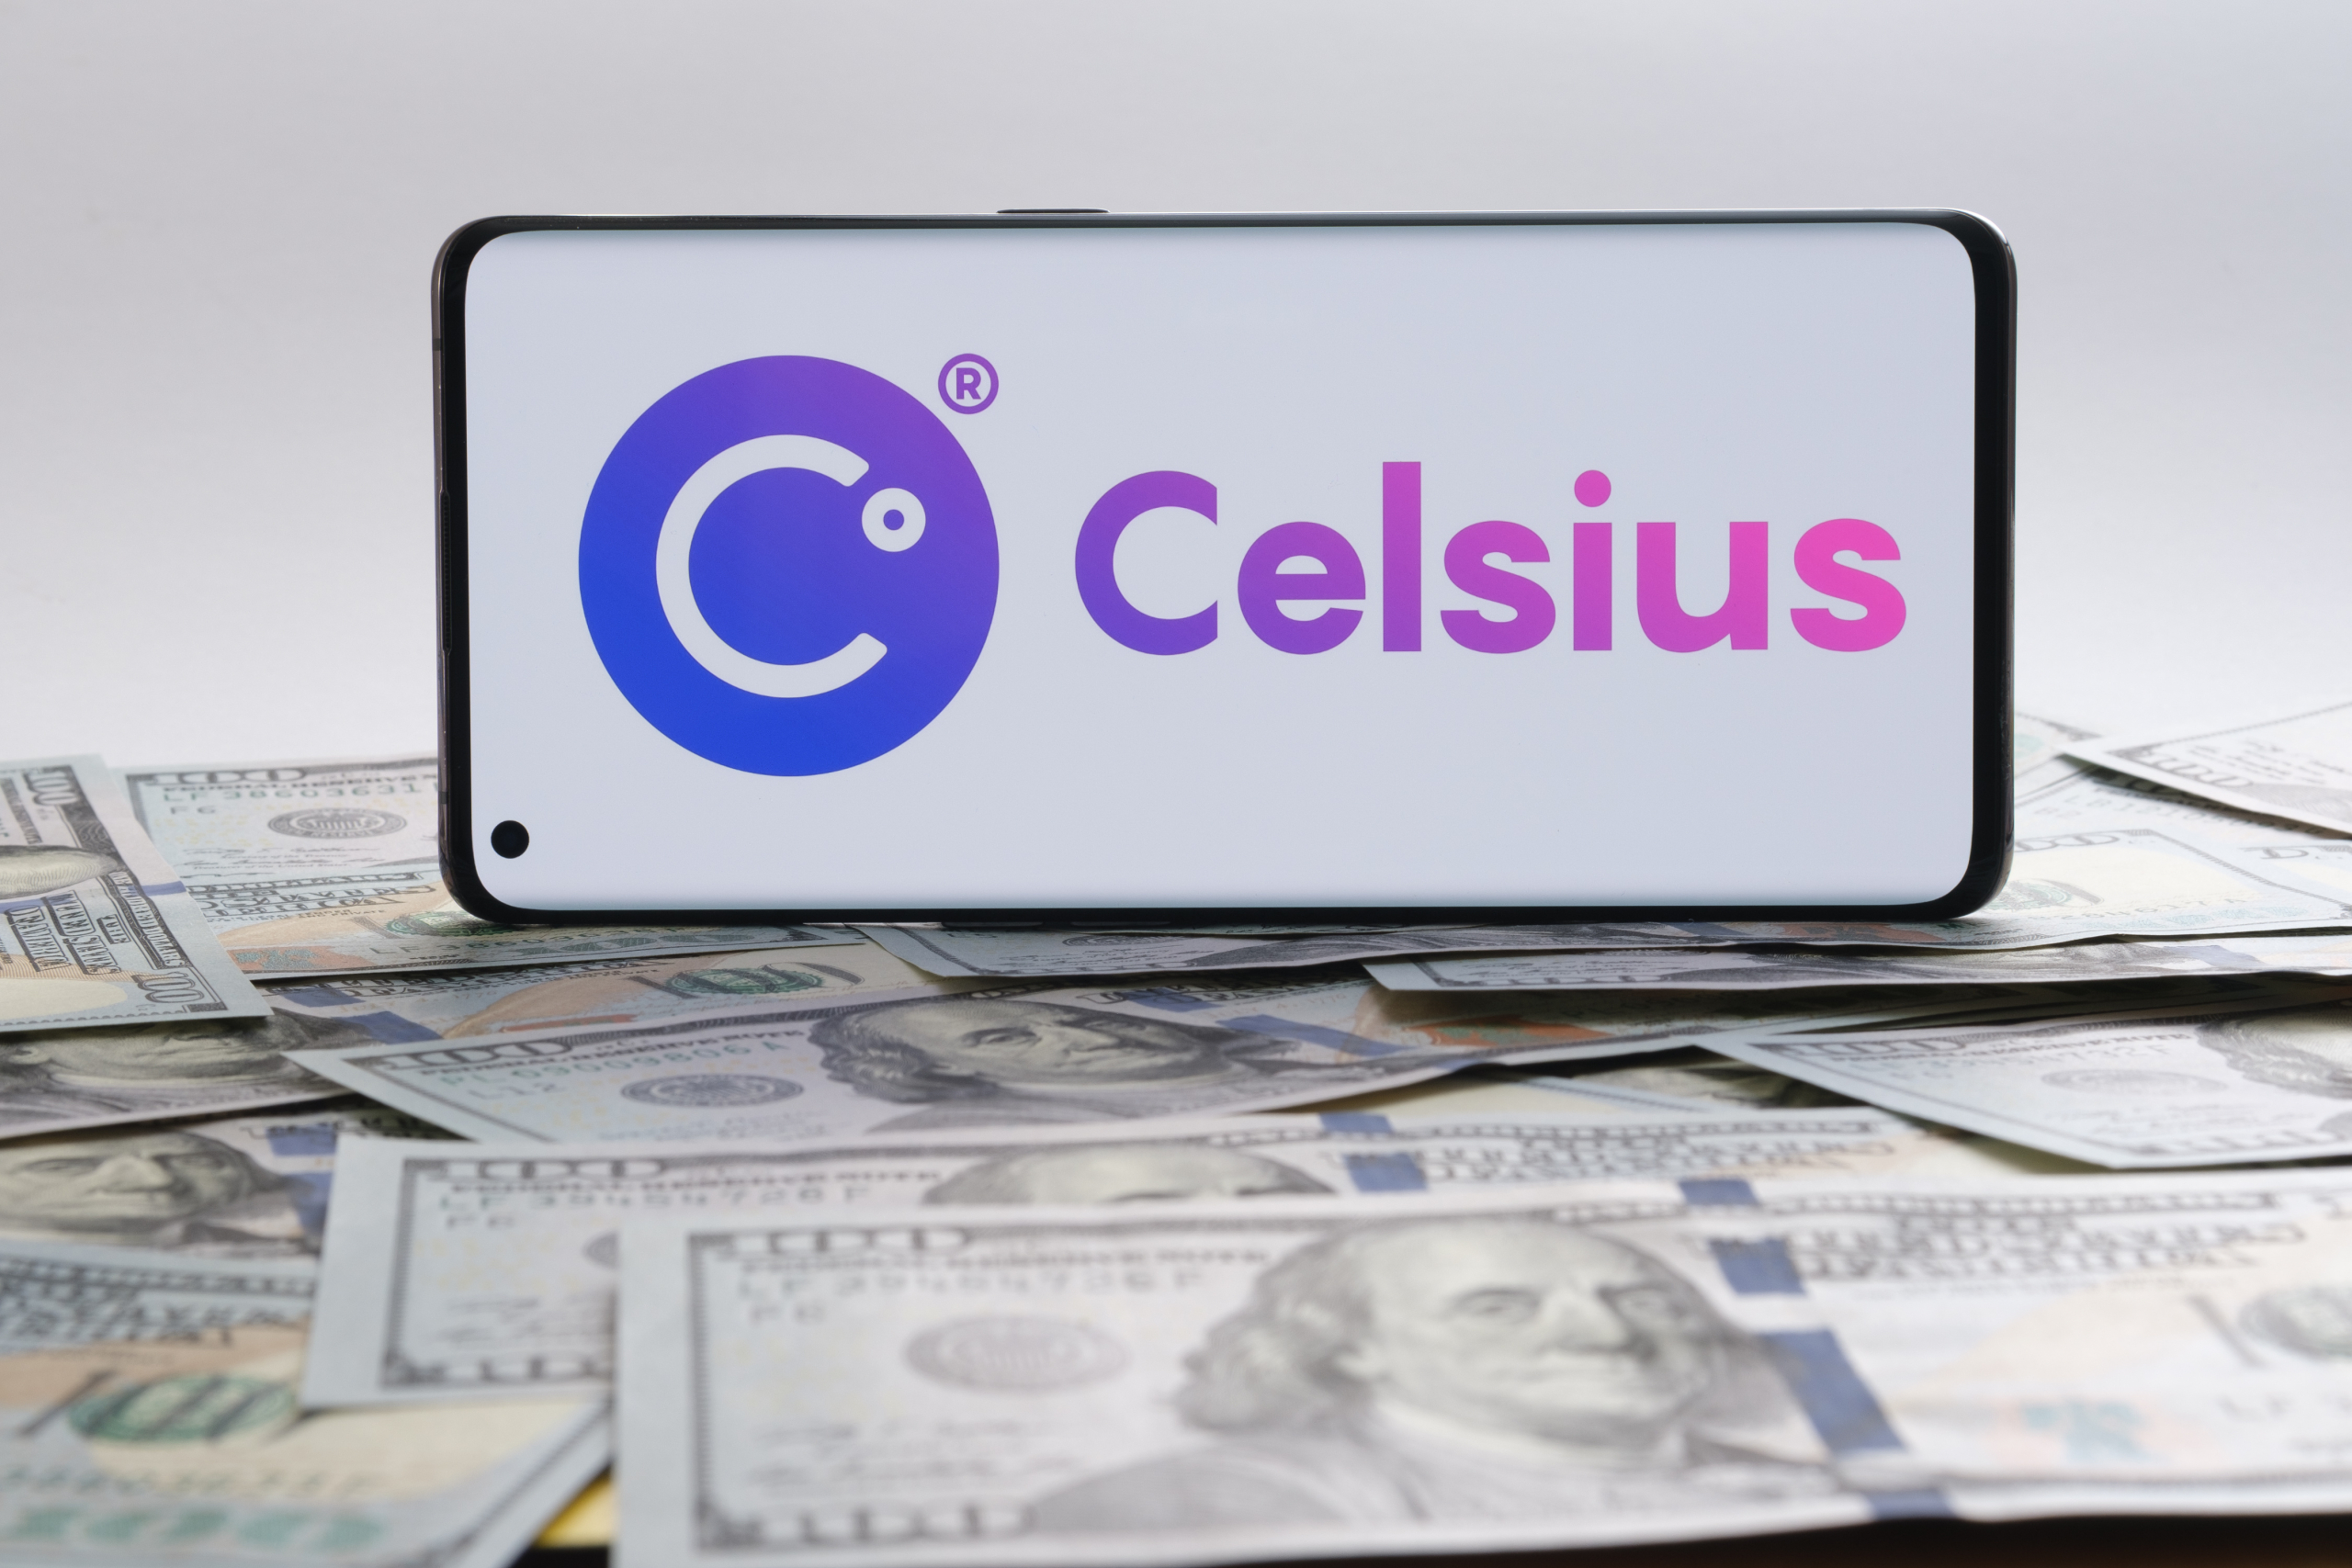 Celsius also used QuickBooks for accounting
